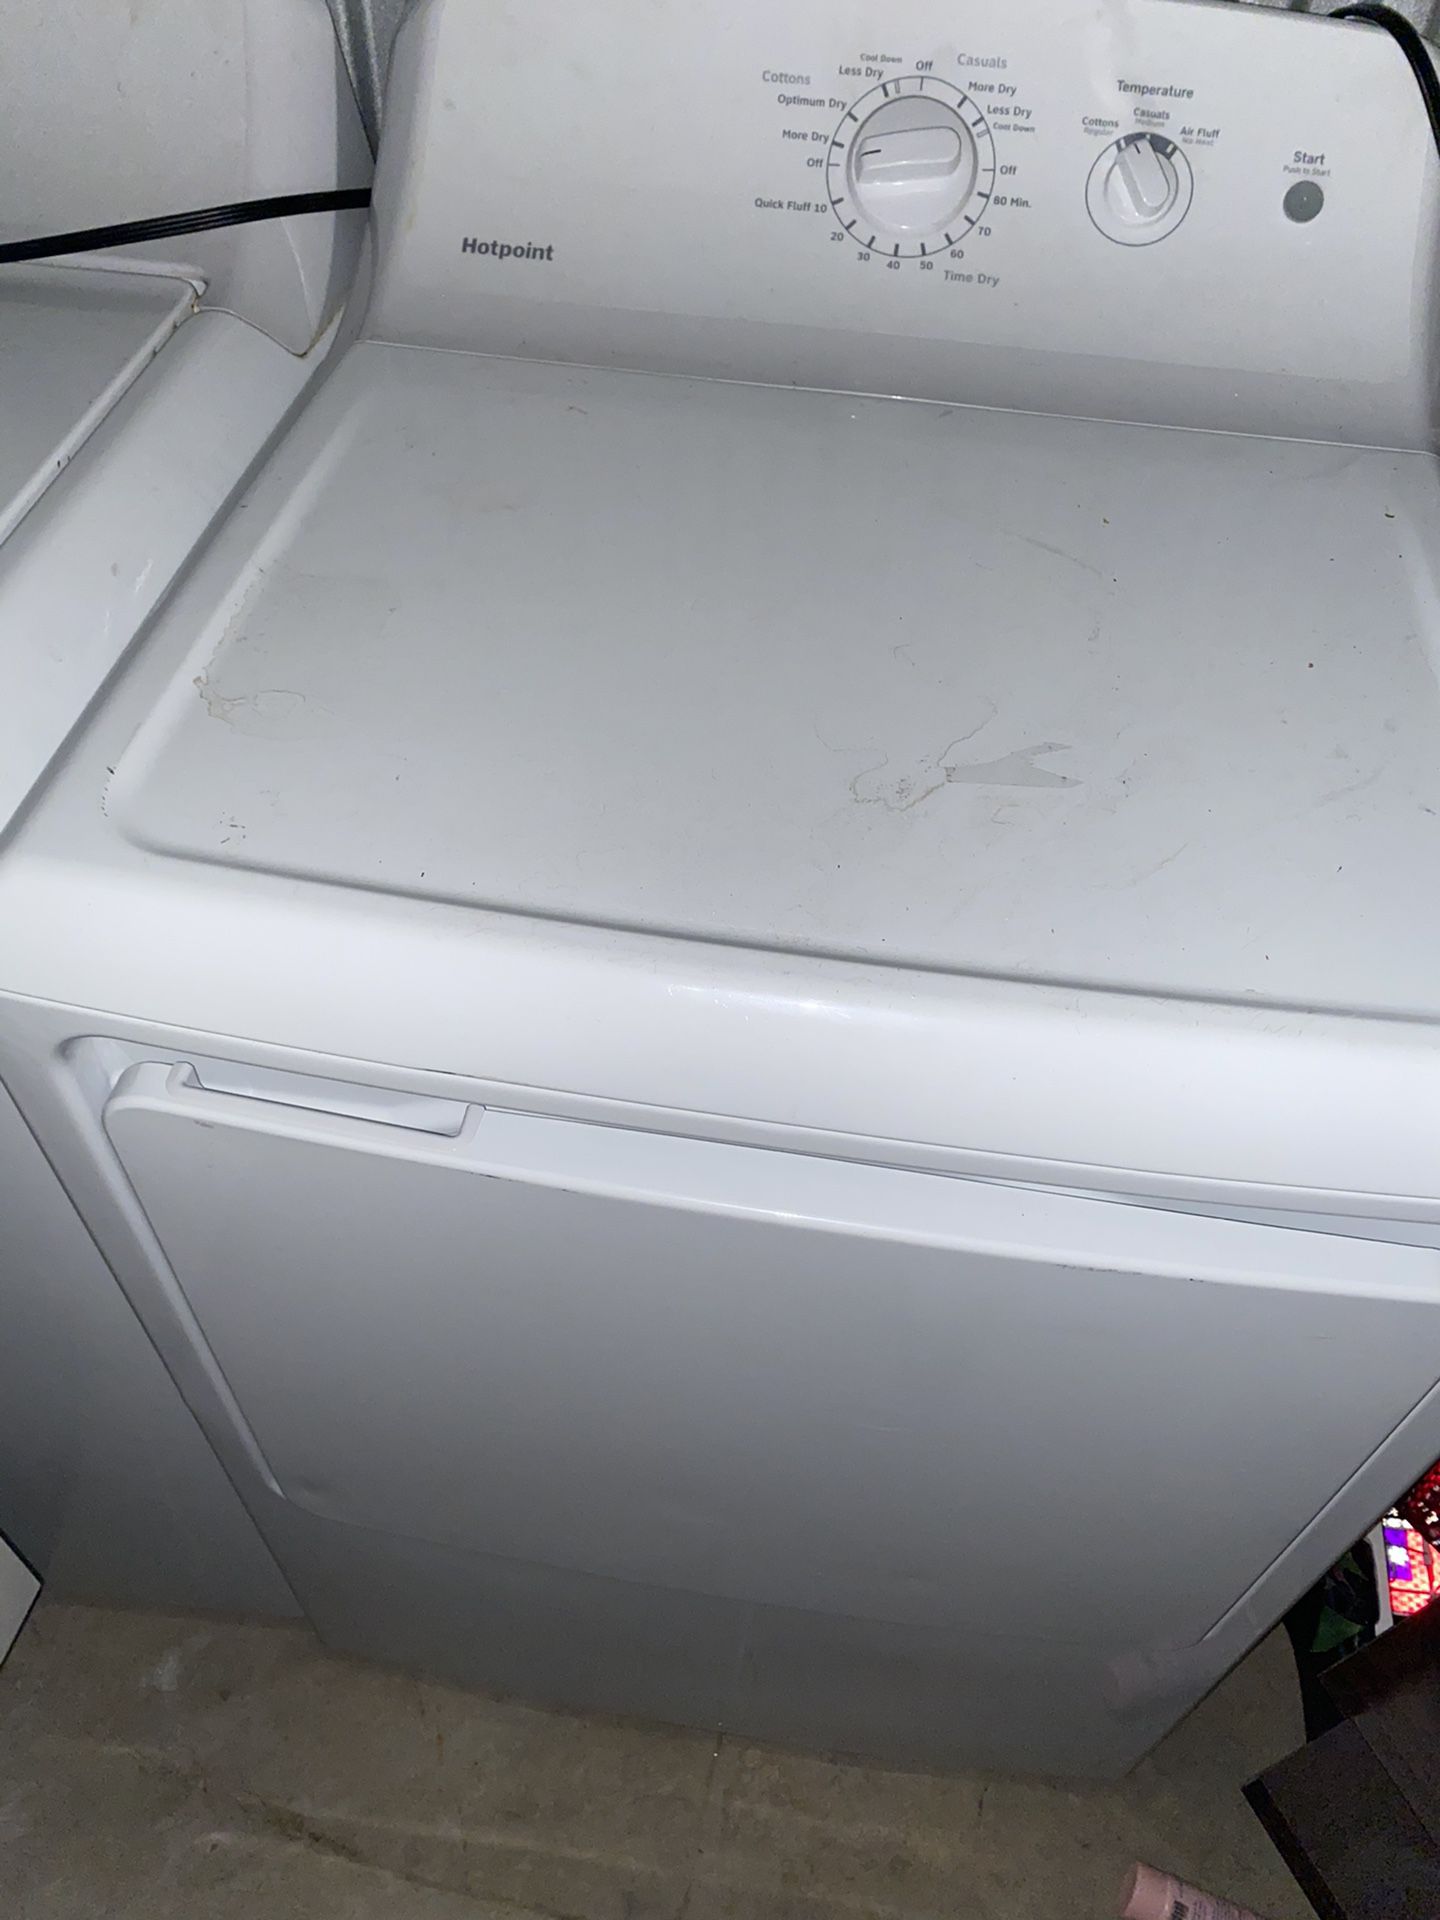 HotPoint Washer and Dryer